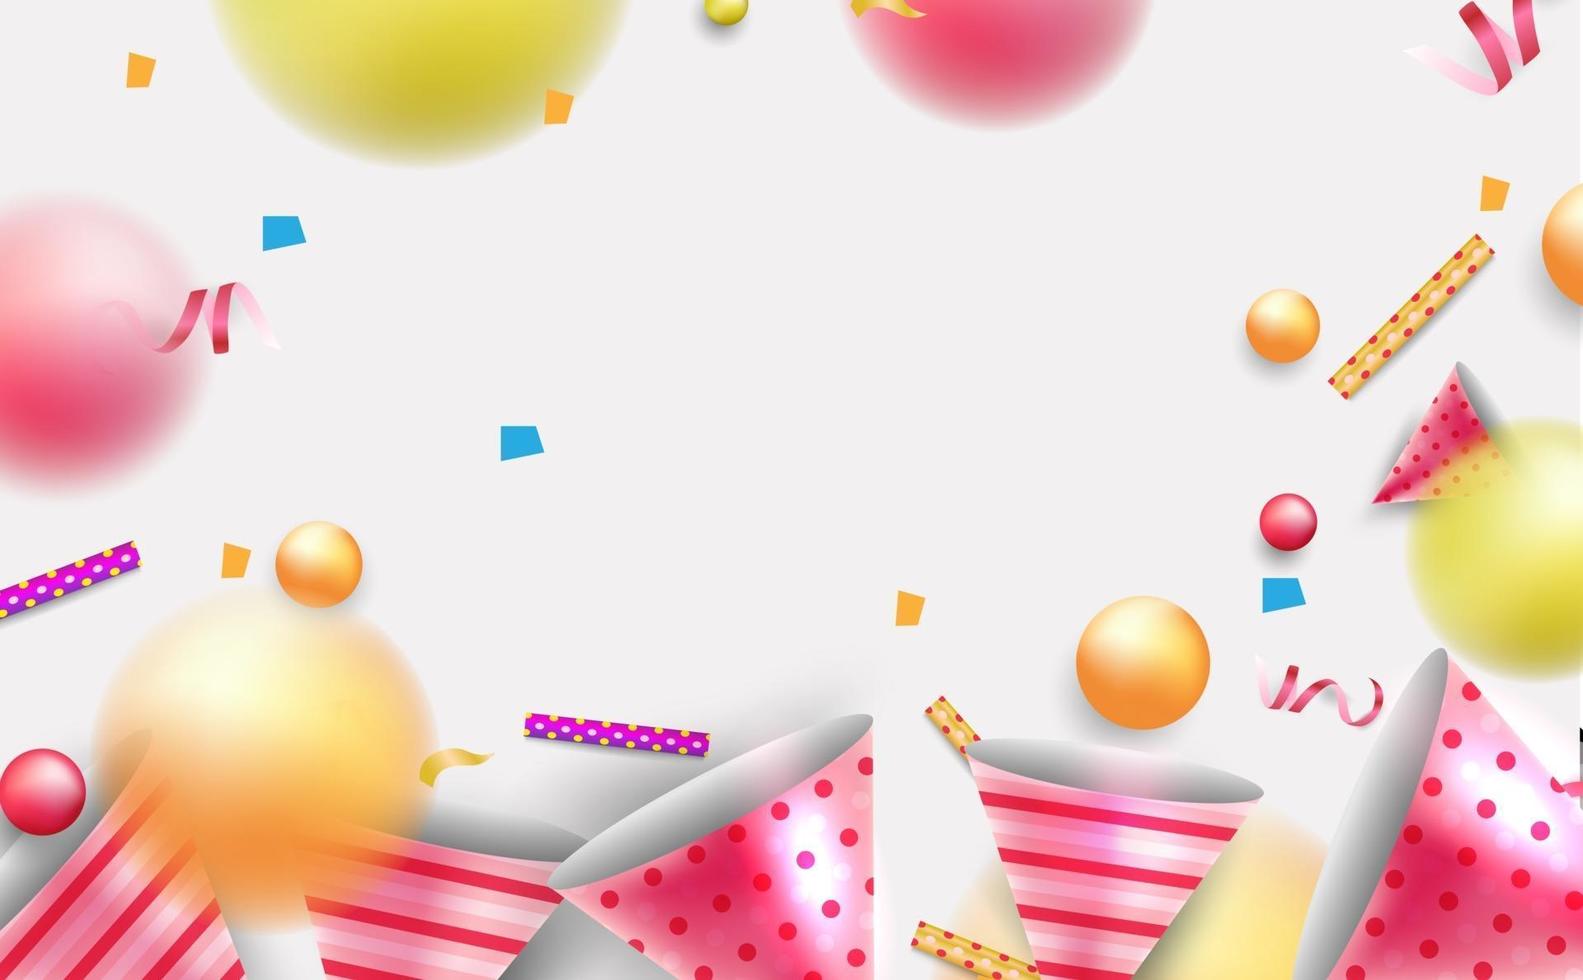 Party background with joyful elements. vector